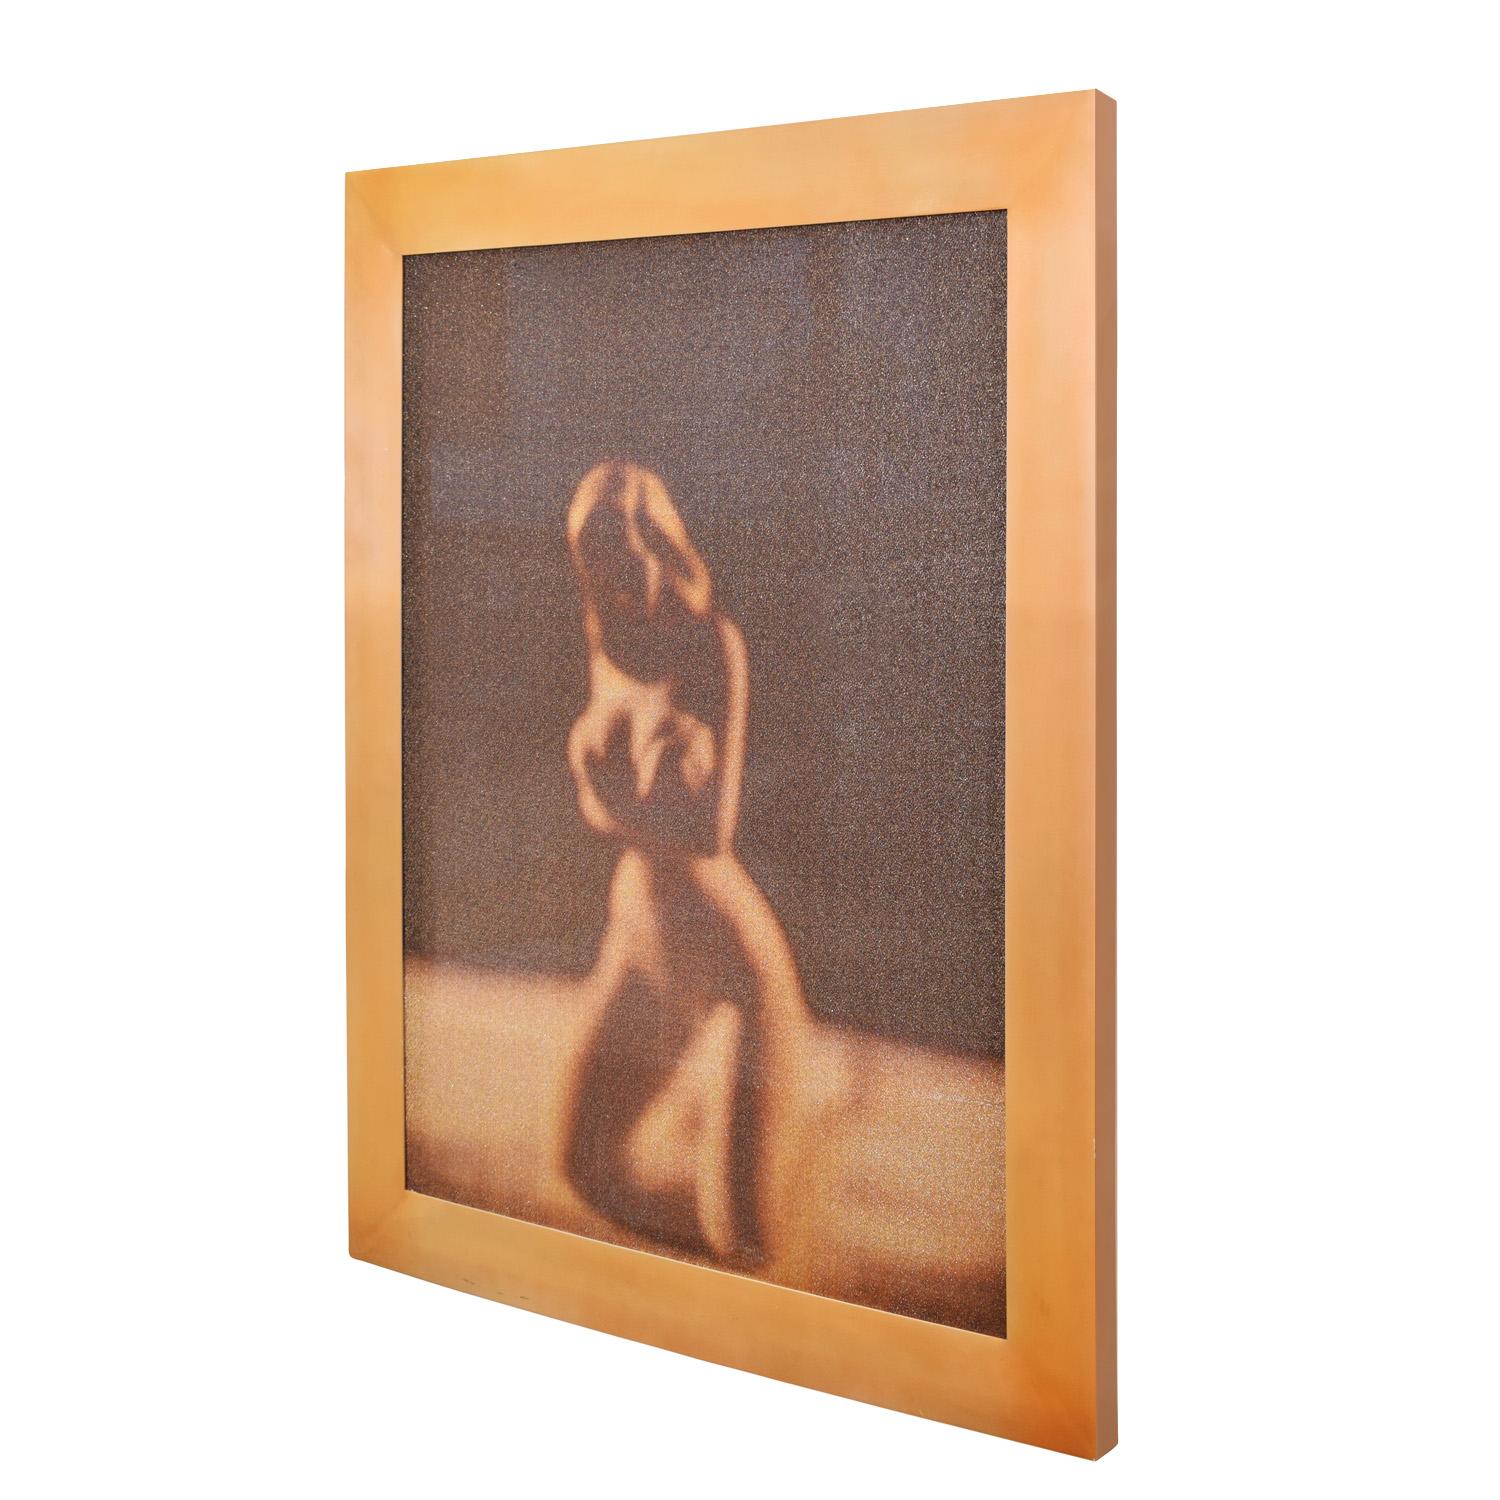 One-of-a-kind photograph from the Desire series, Scanamural on Copper Lame in a custom copper frame, unique variation outside the edition, by David Levinthal, American 1991. Authentication and valuation by the artist accompanies this unique work.